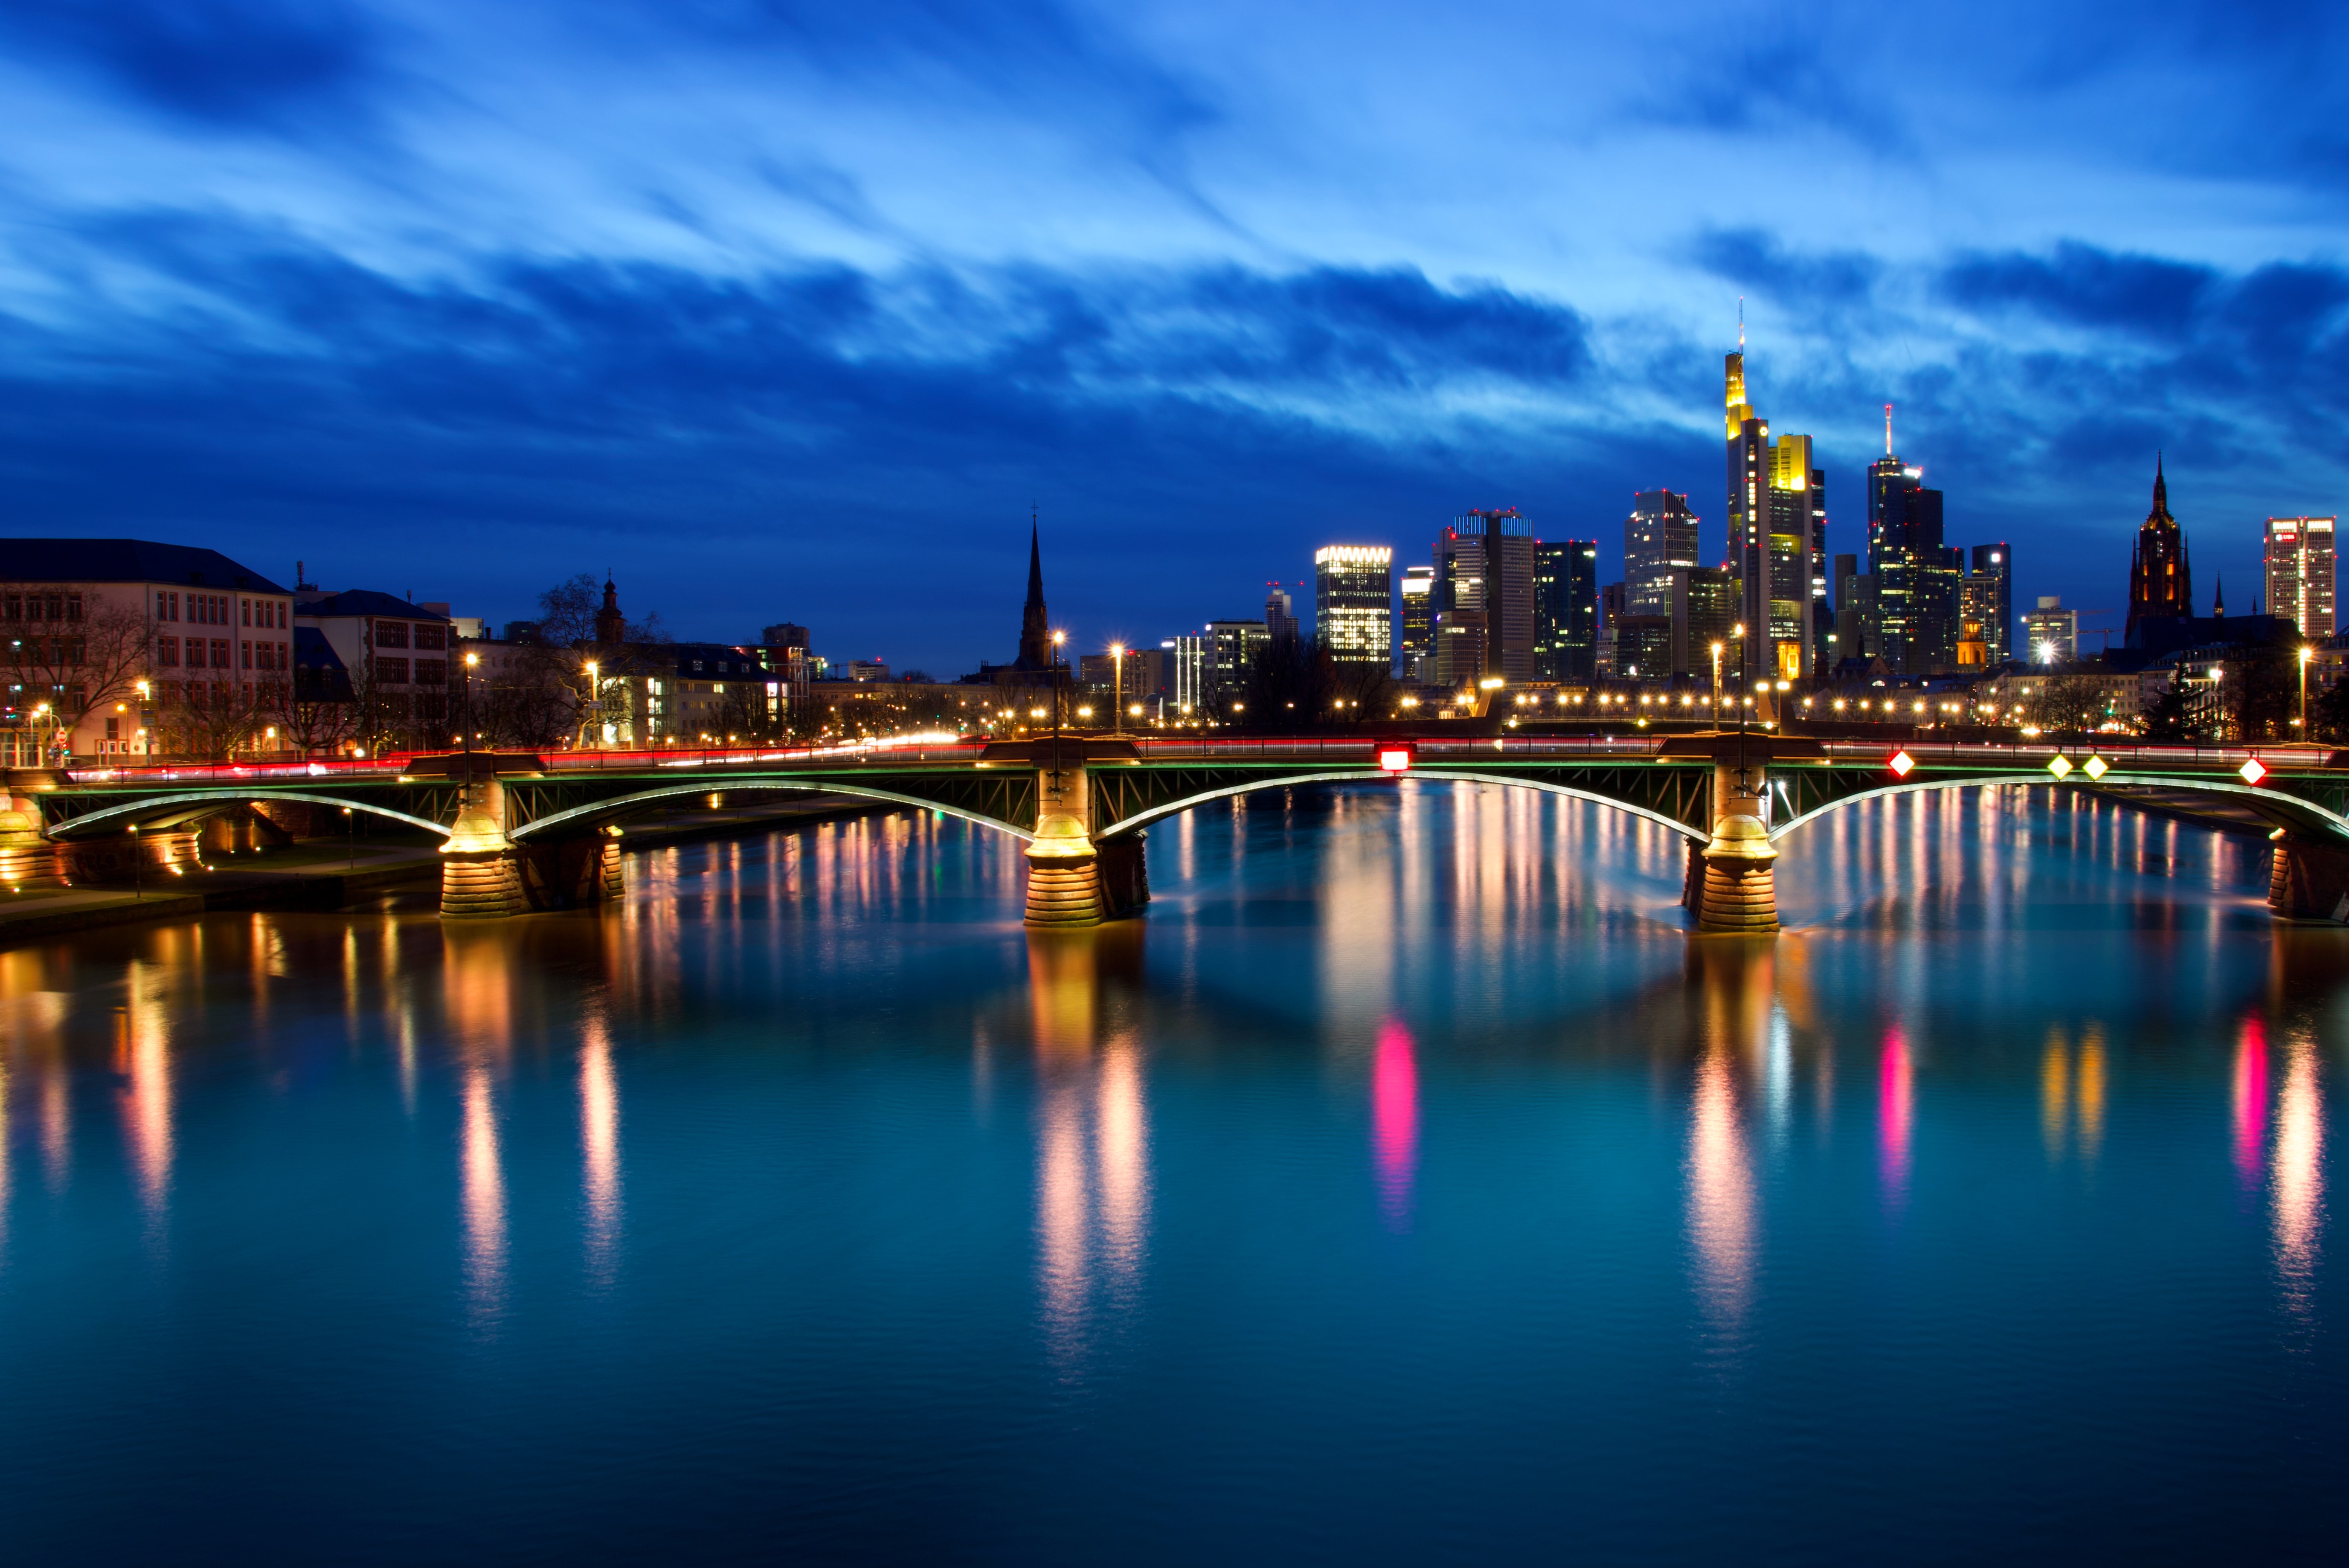 germany, cities, rivers, building, night city, bridge images